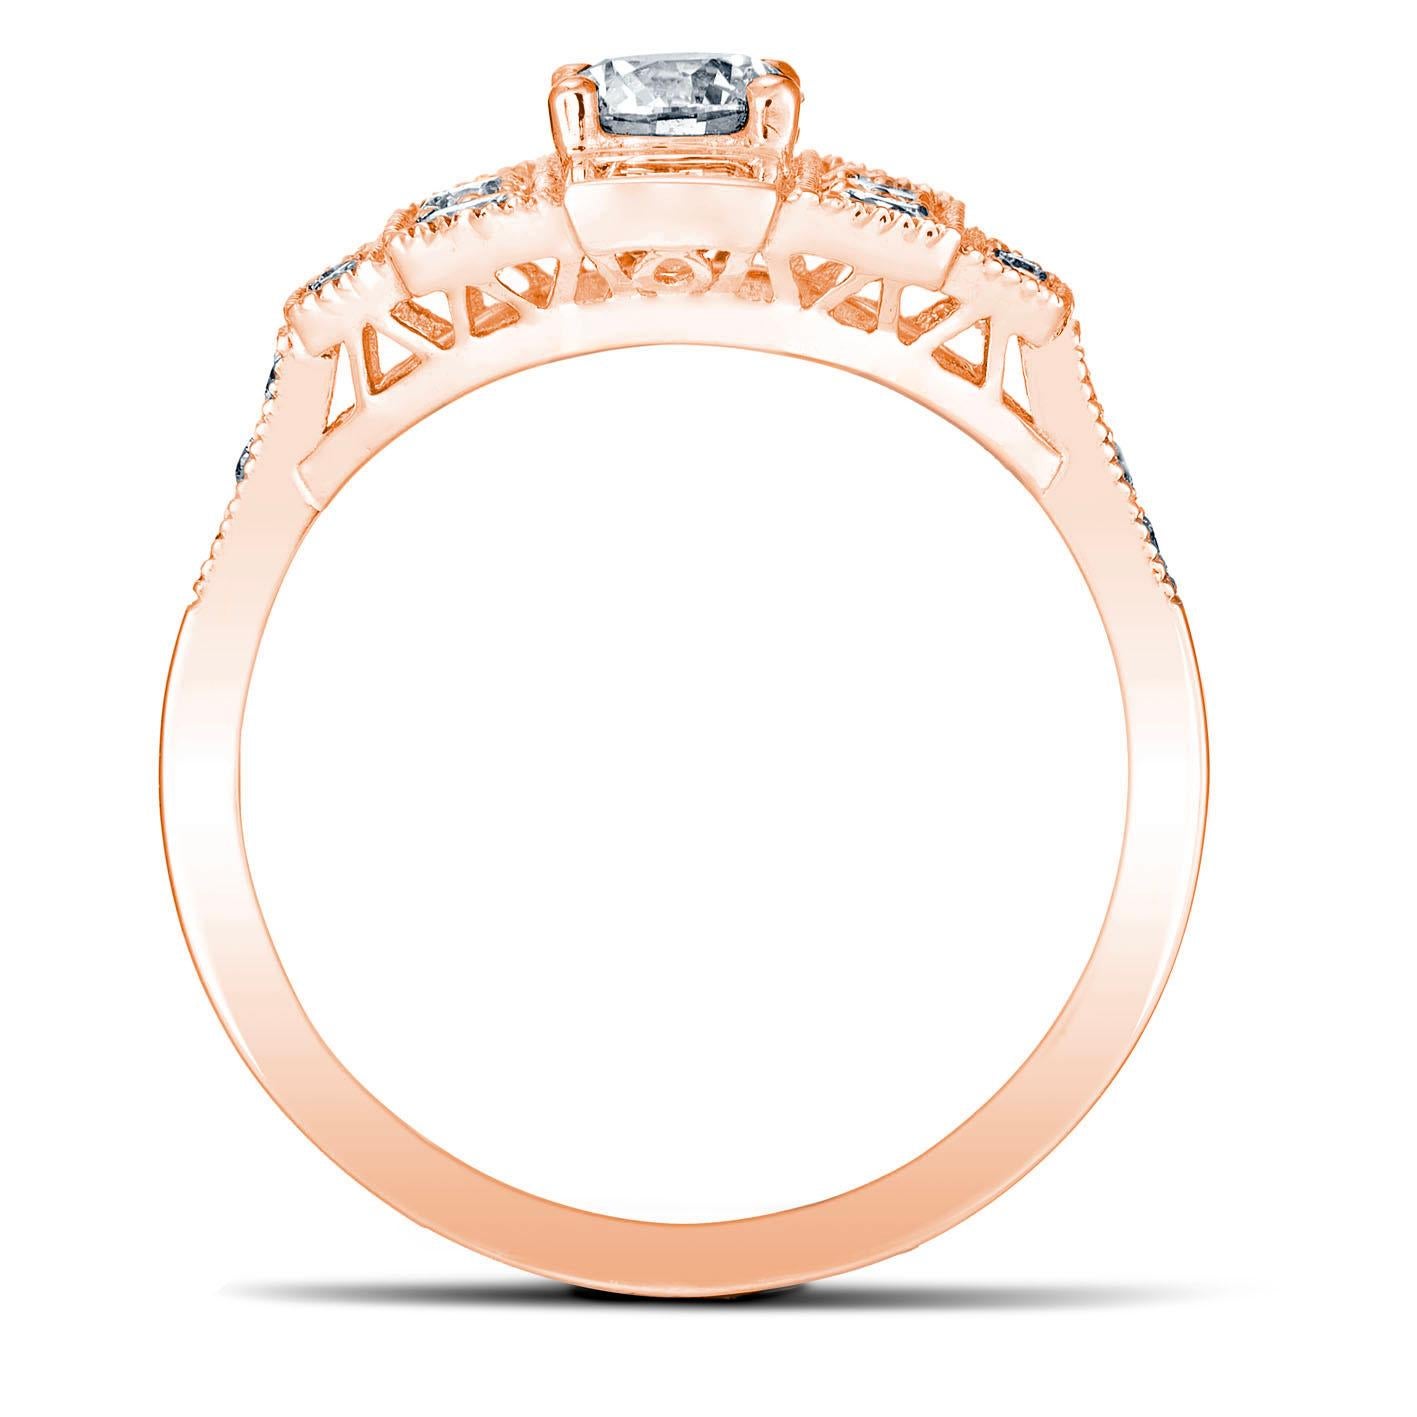 For Sale:  Art Deco Style 18k Rose Gold 0.50 Ct Diamond Ring Set With 2 Square Diamonds 2